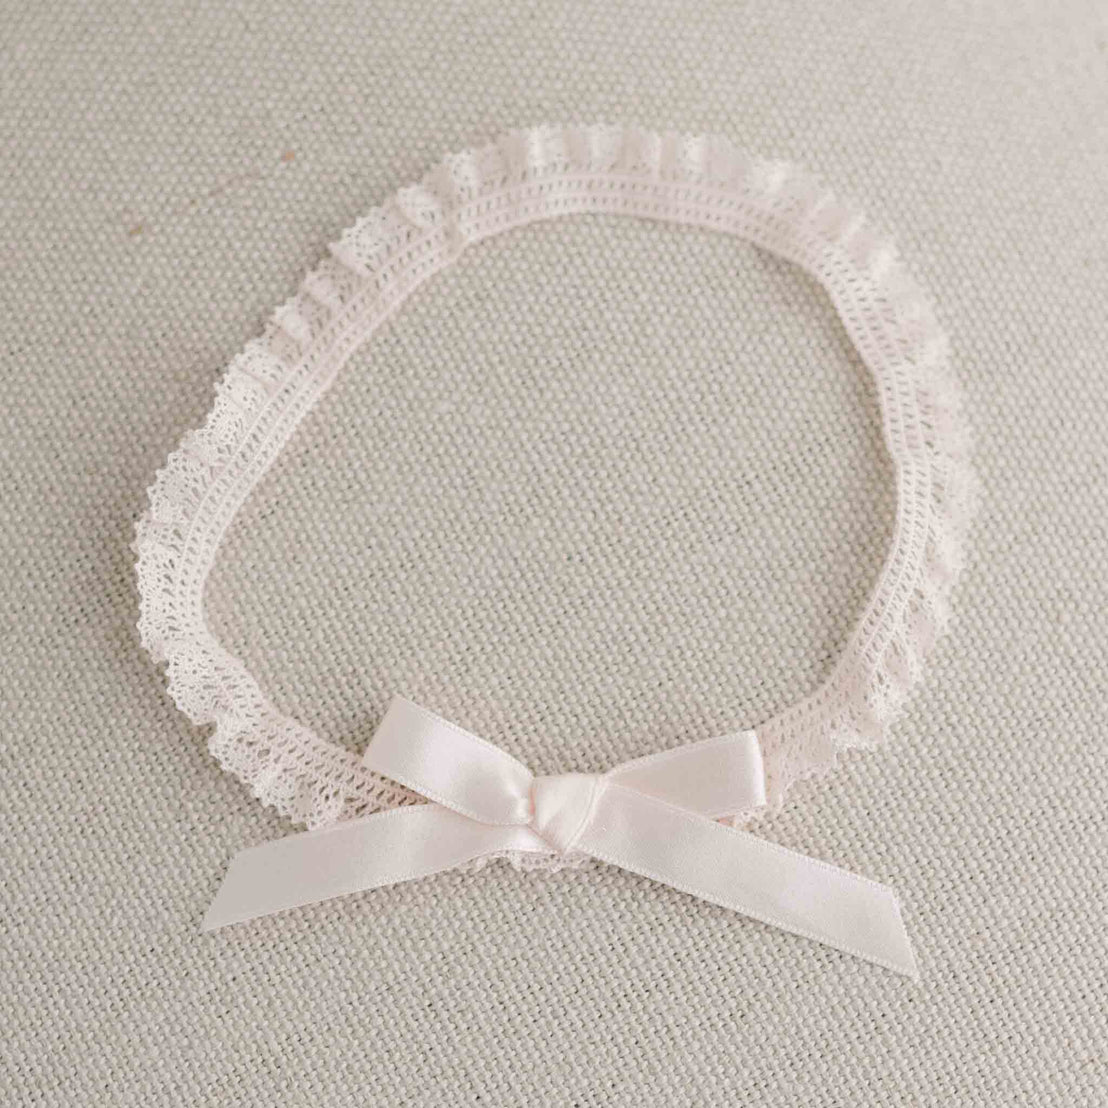 A delicate Ava Headband made from a blush pink lace with a matching silk ribbon bow, placed on a light grey textured background.